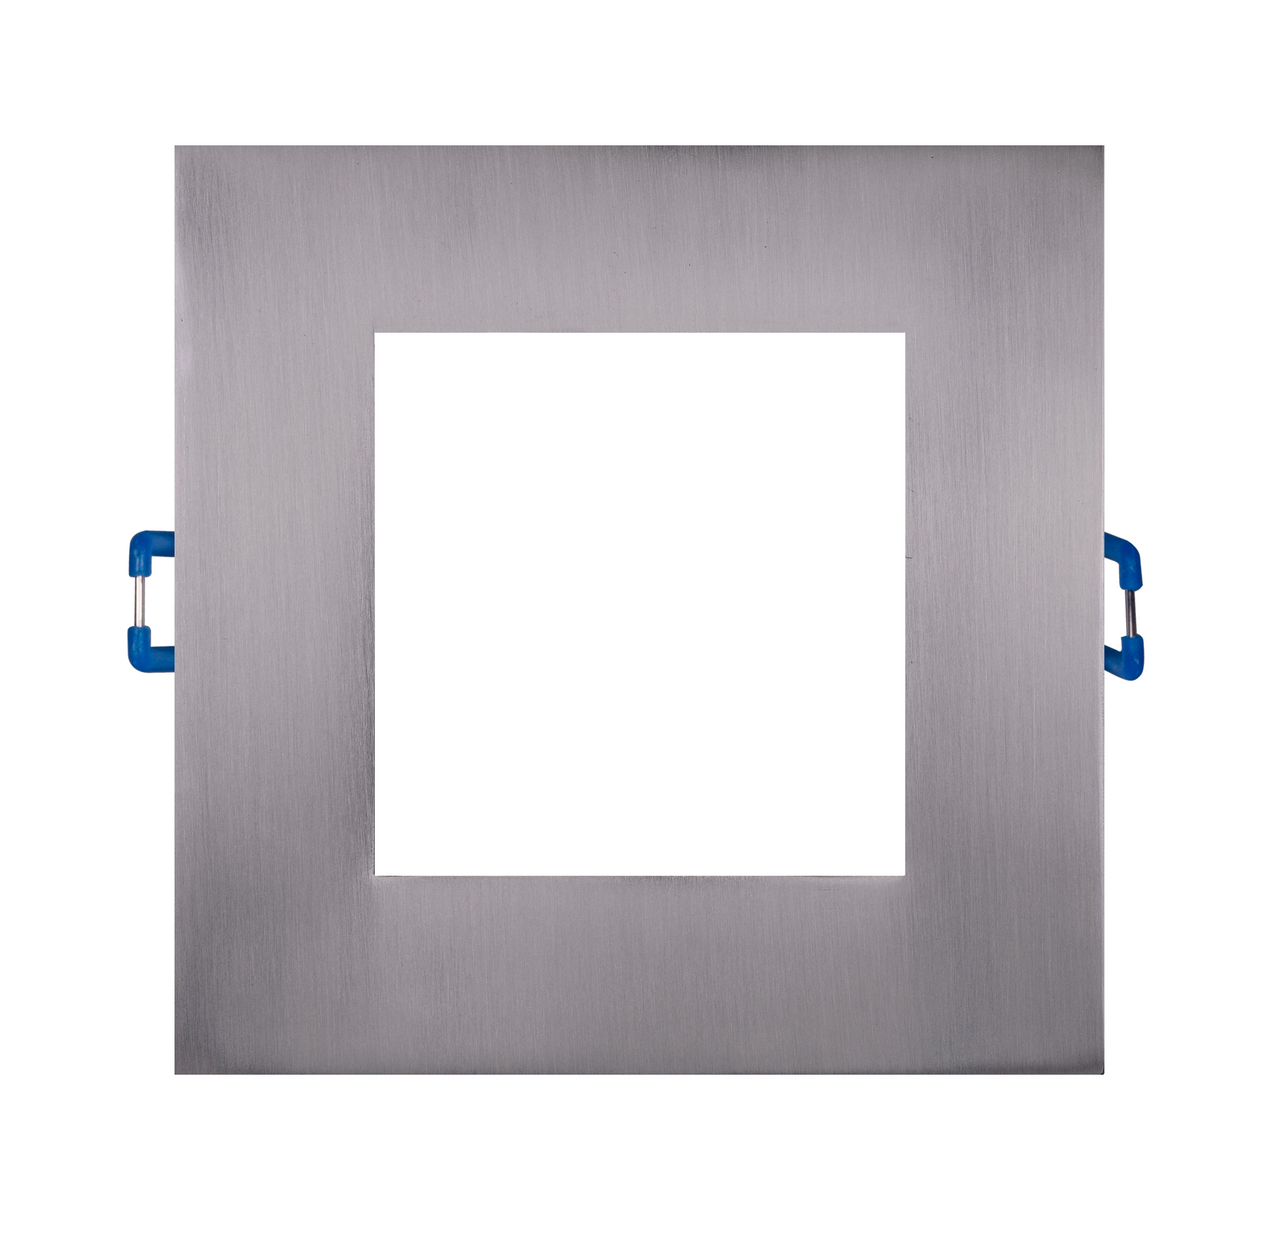 NICOR DLE621202KSQNK DLE6 Series 6 in. Square Nickel Flat Panel LED Downlight in 2700K